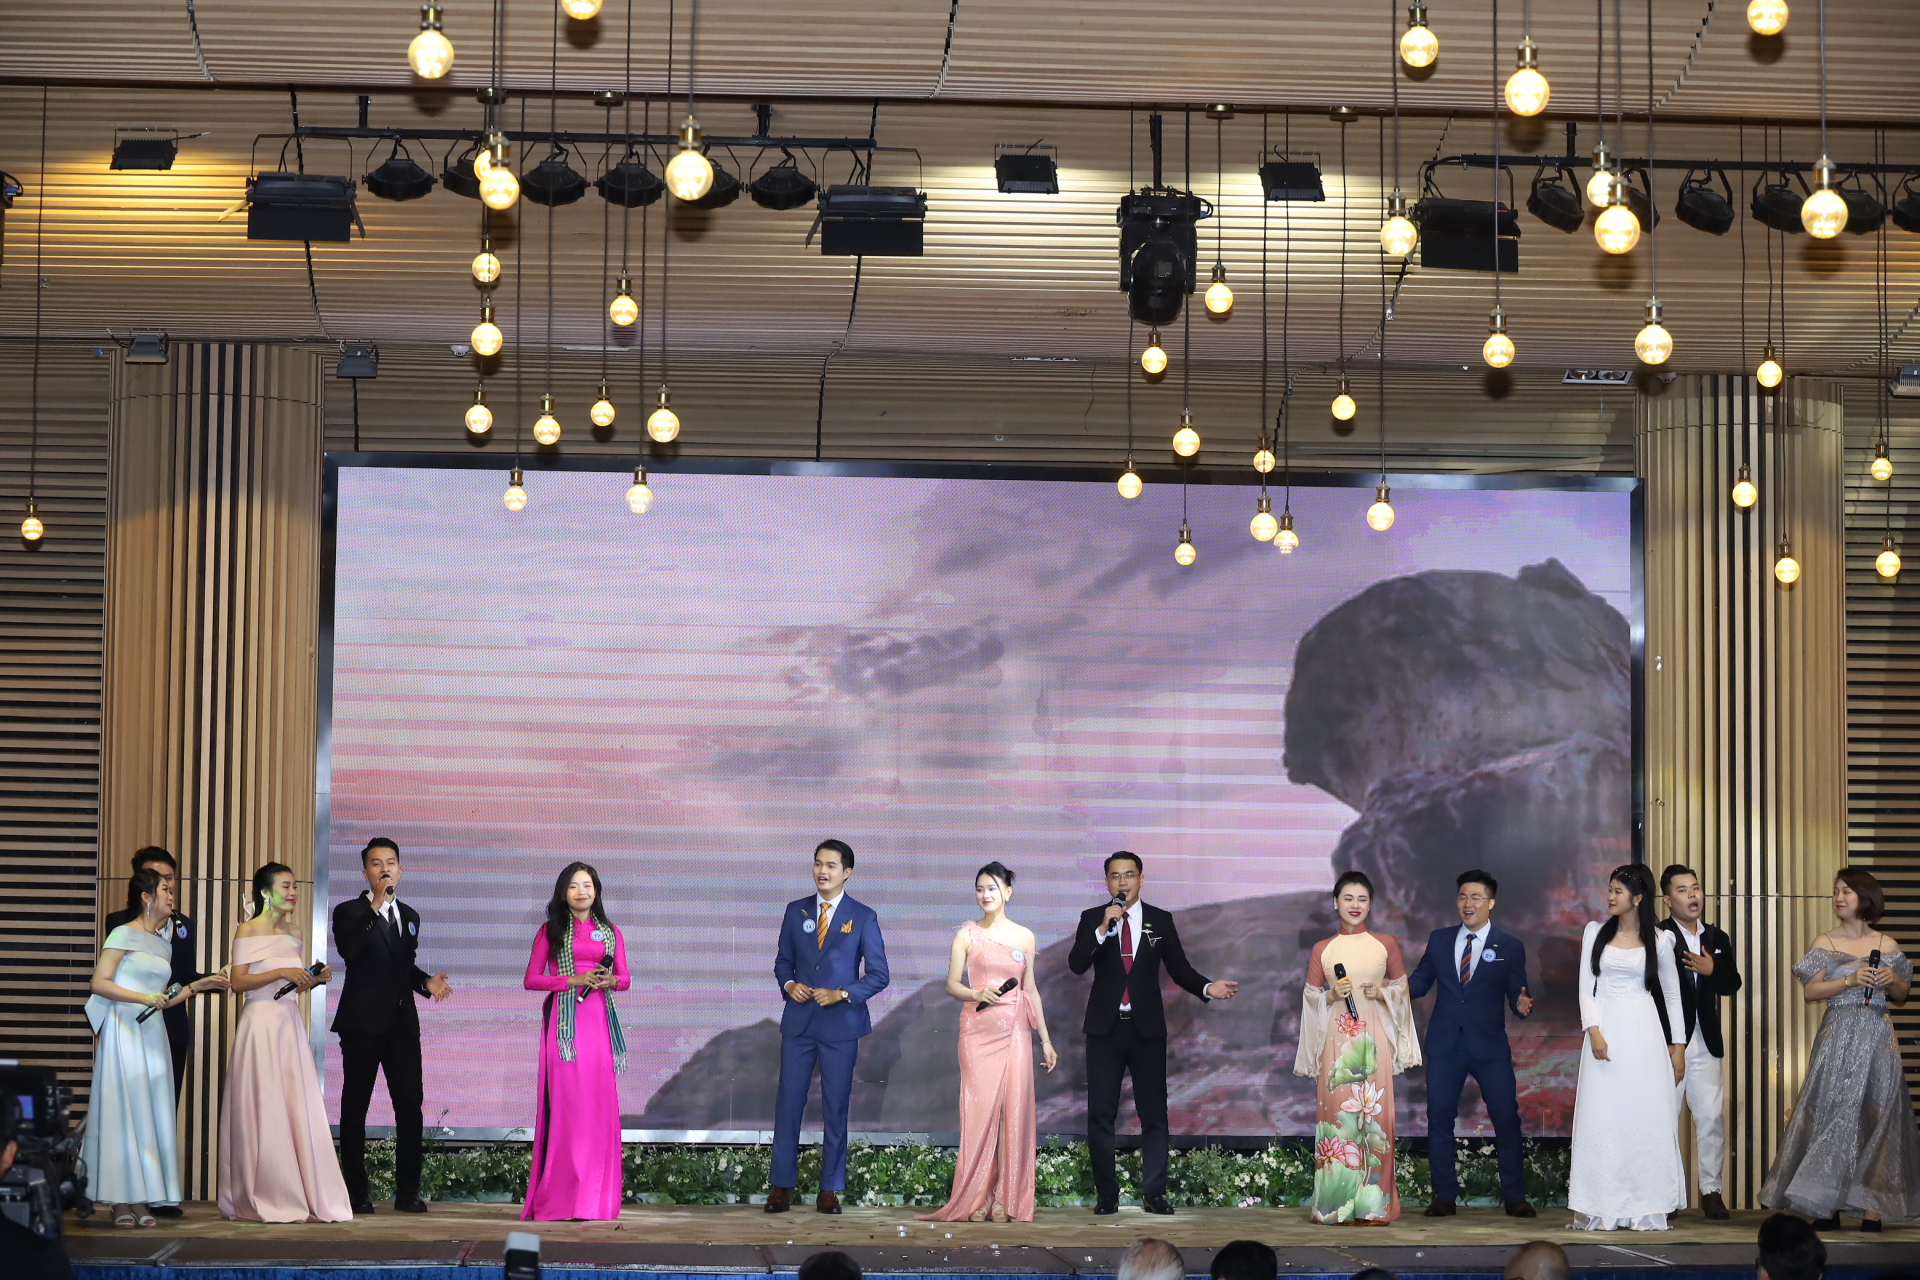 The contestants singing a song about Nha Trang City

